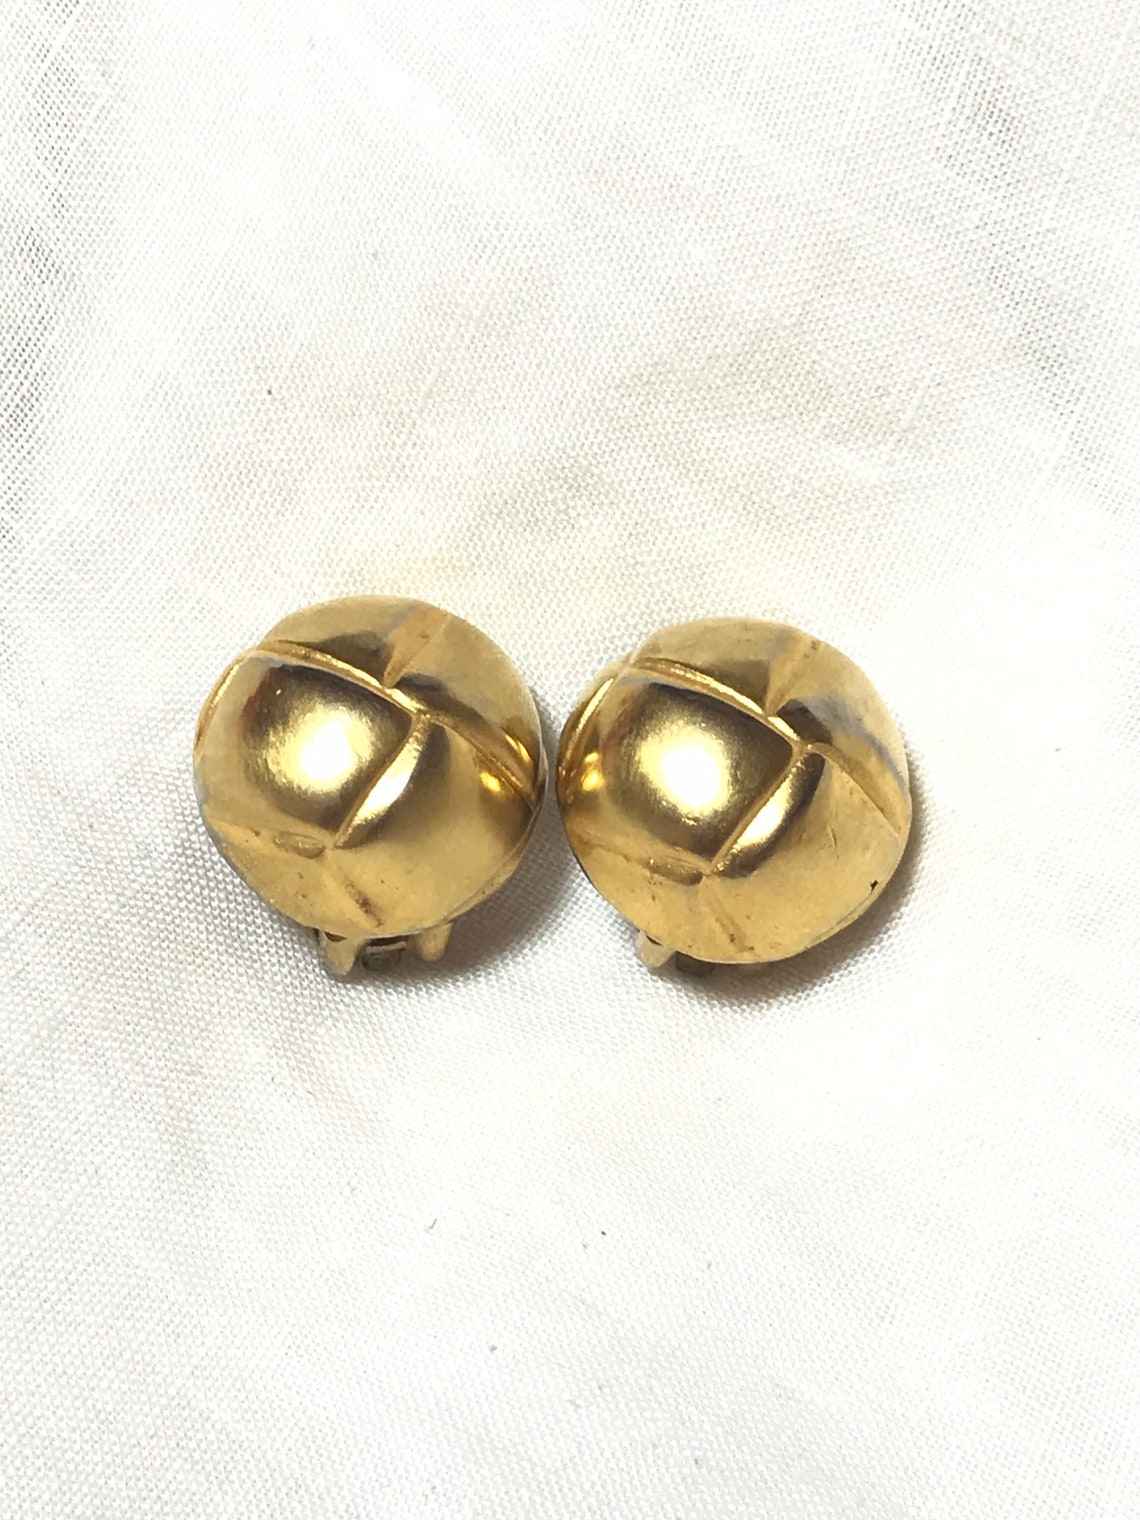 Vintage HERMES Gold Tone Round Earrings With Knot Button | Etsy